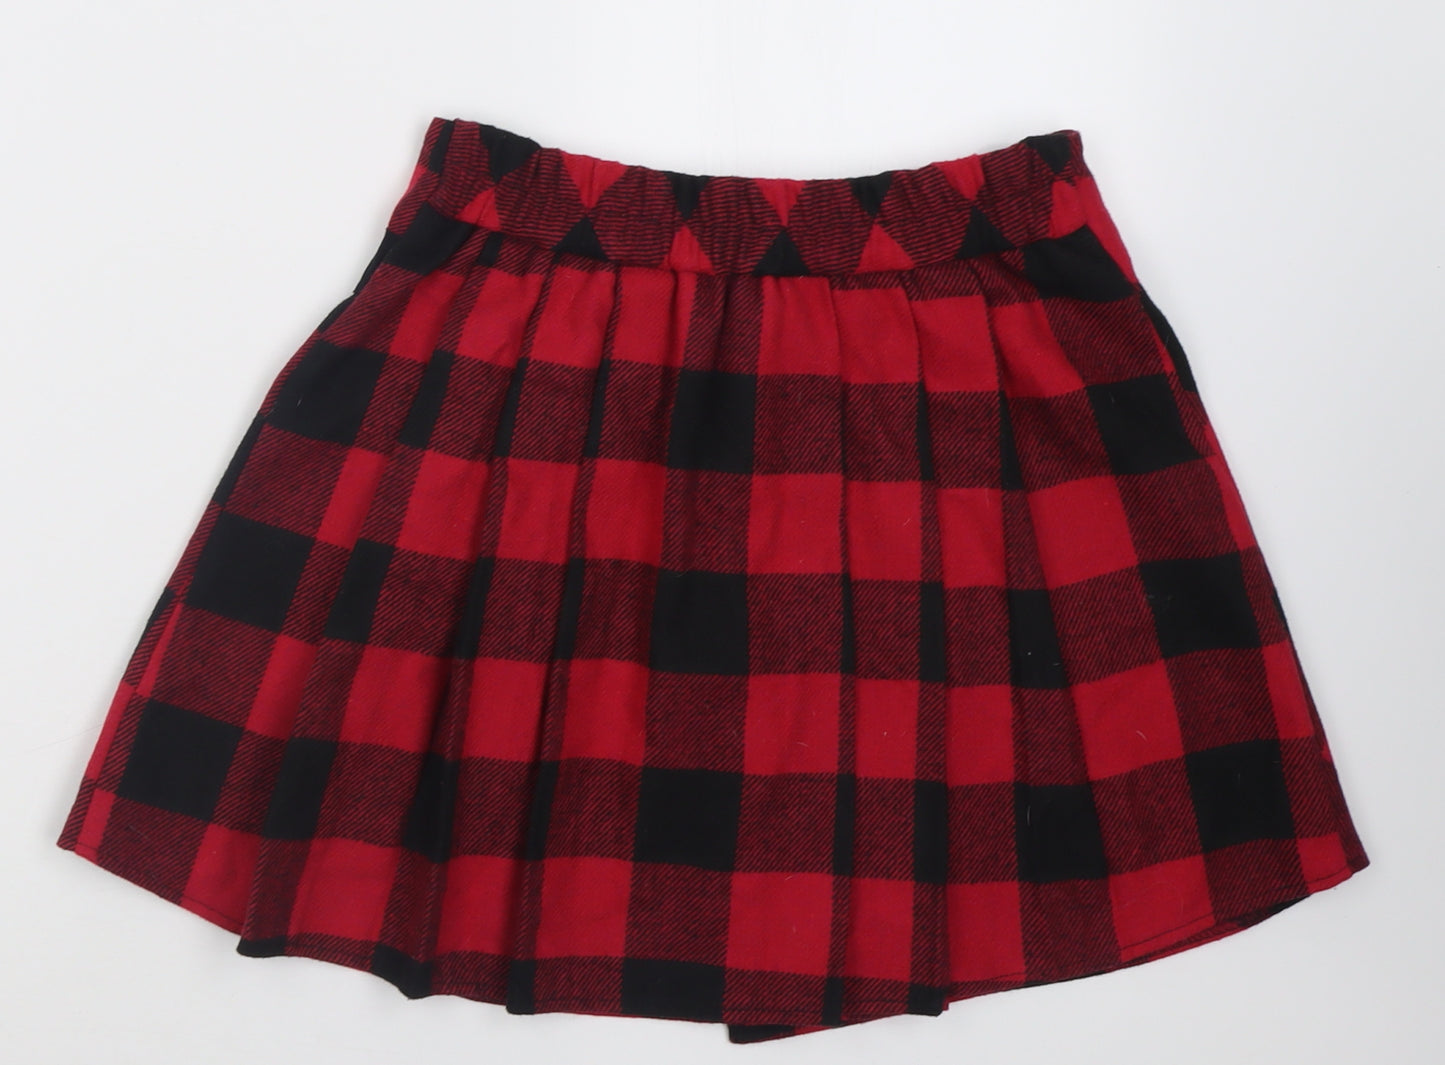 Dunnes Stores Girls Red Check Polyester A-Line Skirt Size 10 Years  Regular Tie